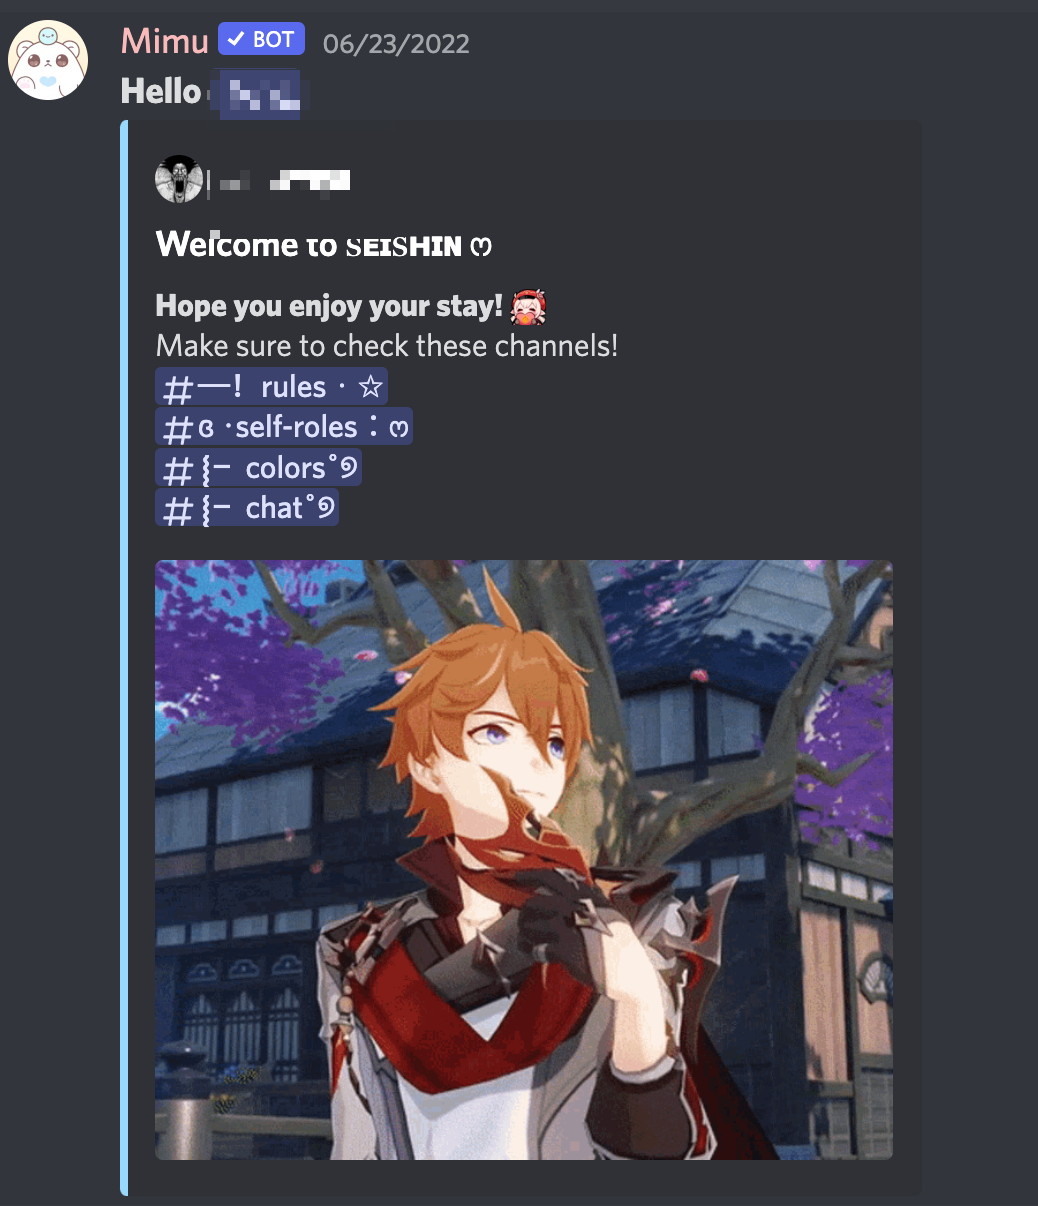 seishin discord welcome message